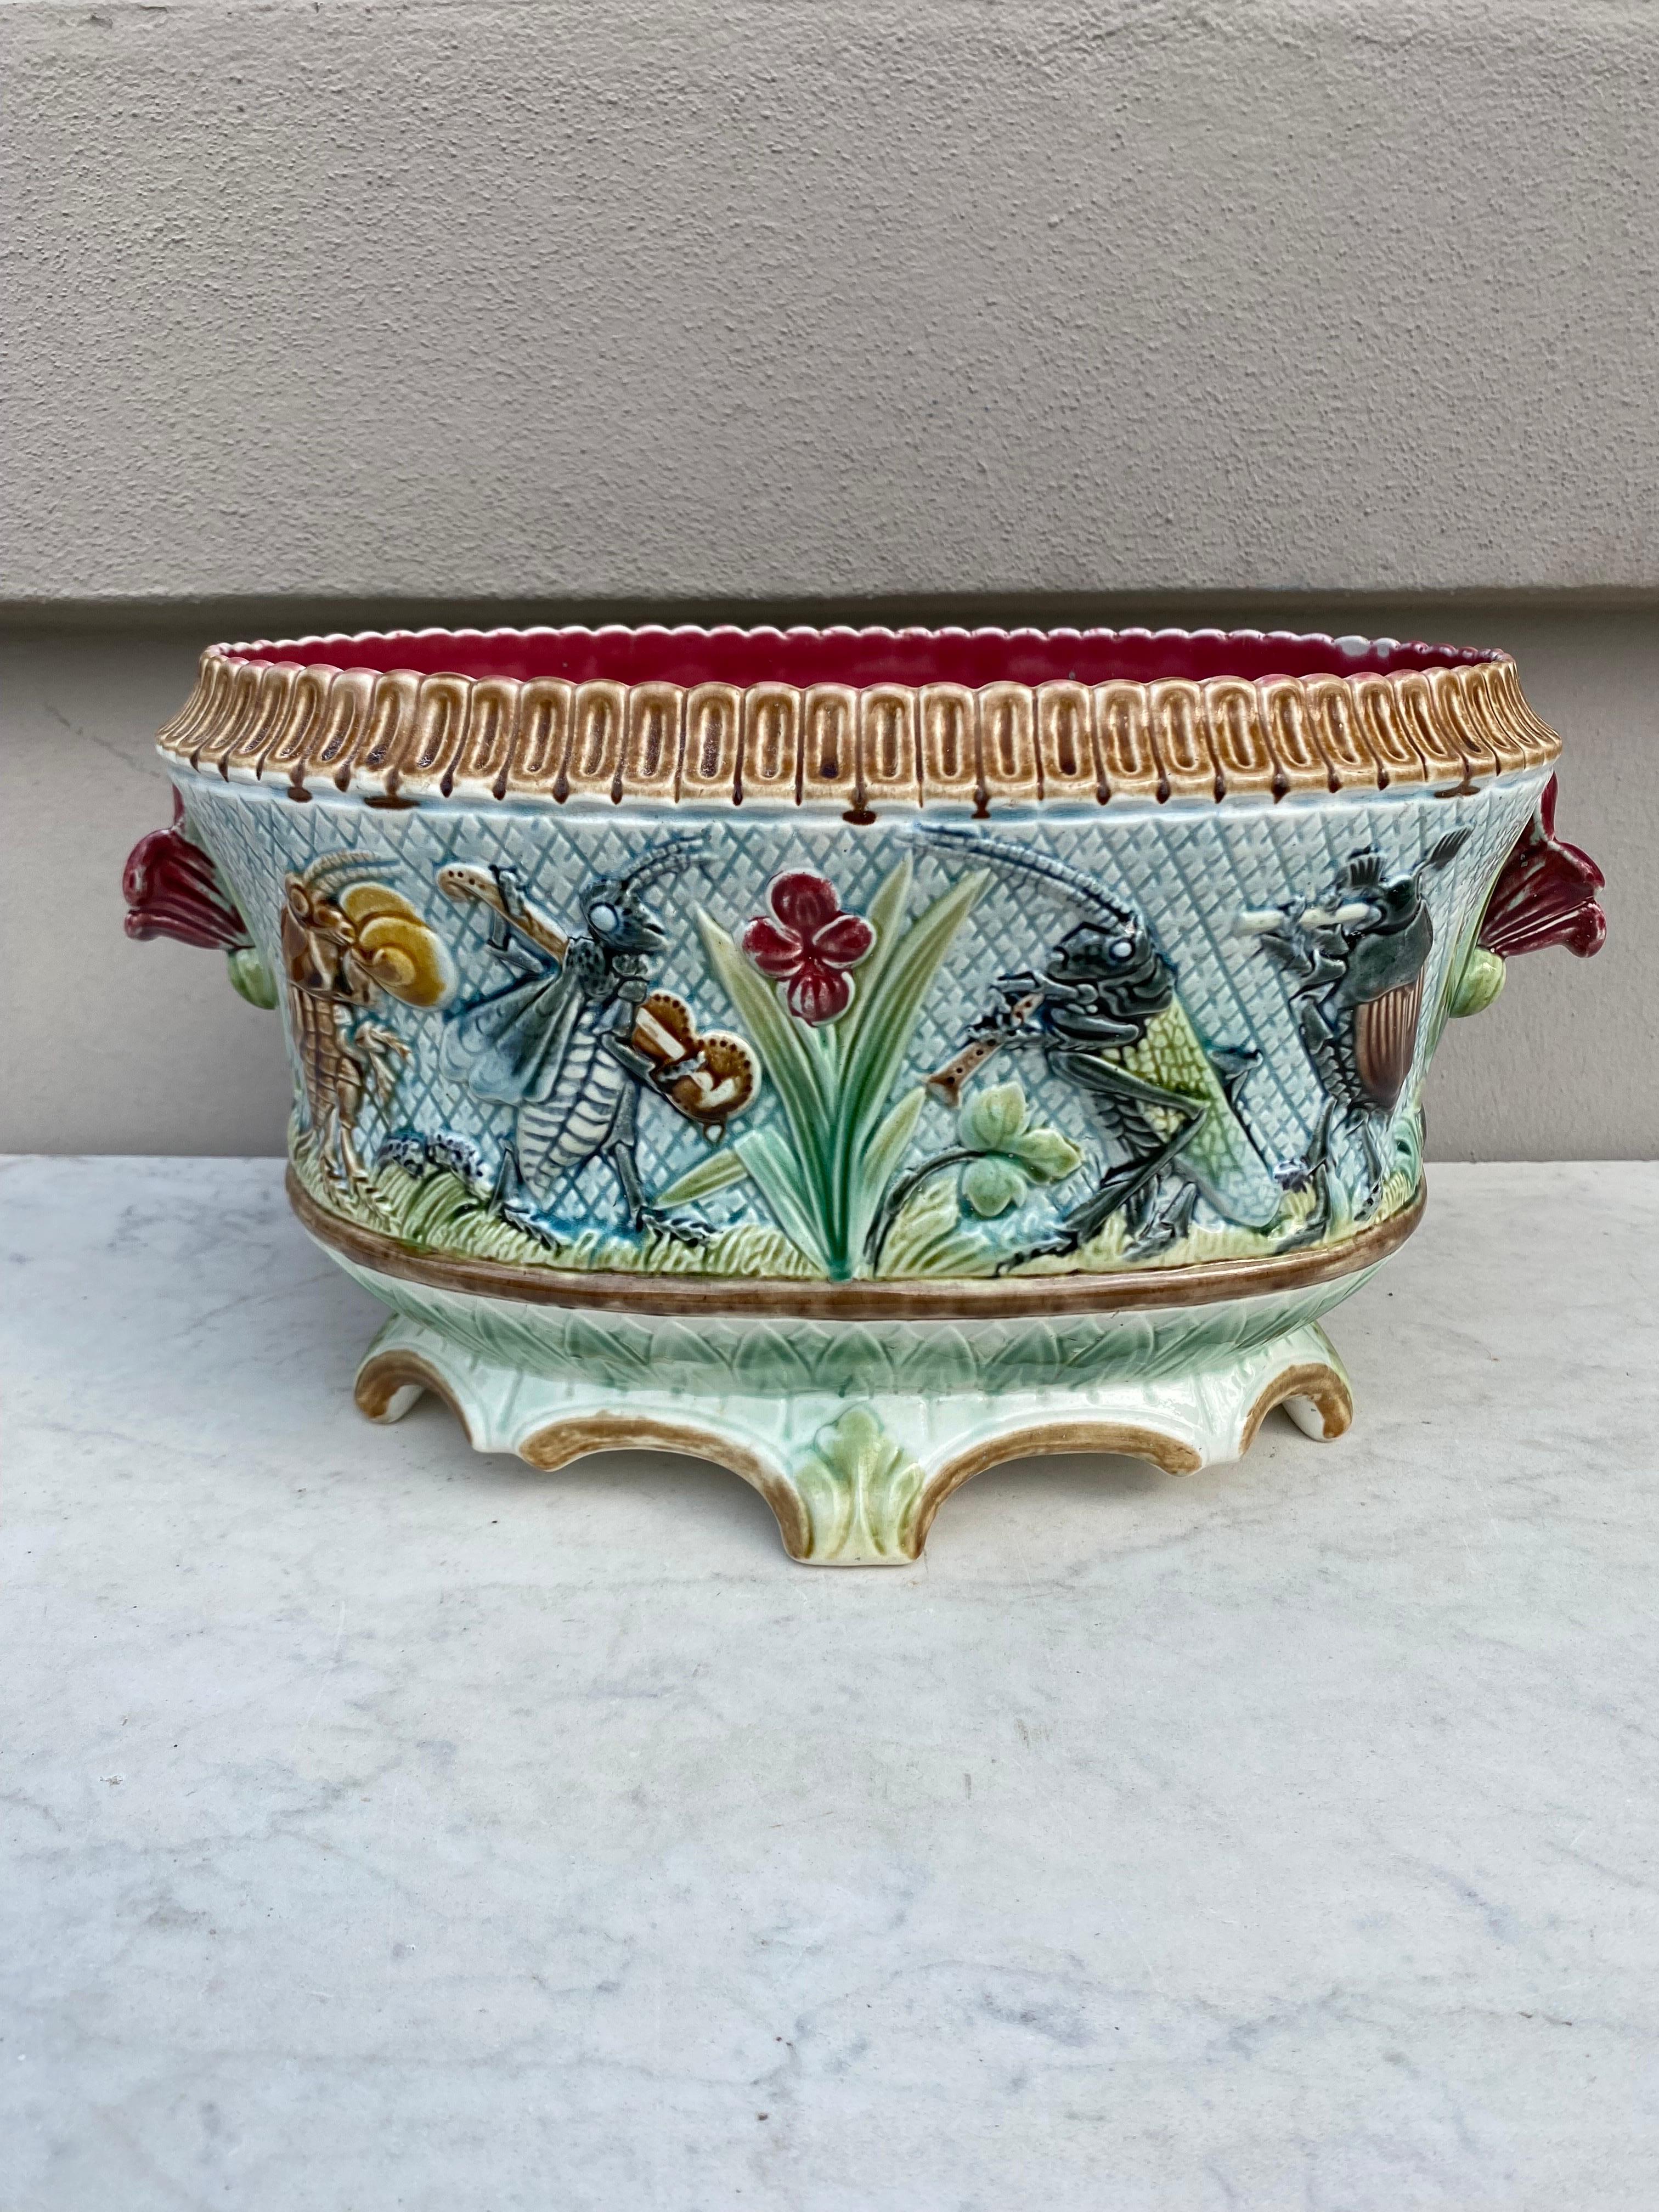 Unusual and humoristic 19th French Majolica jardinière with insects playing musicals instruments.
Decorated with leaves and flowers.